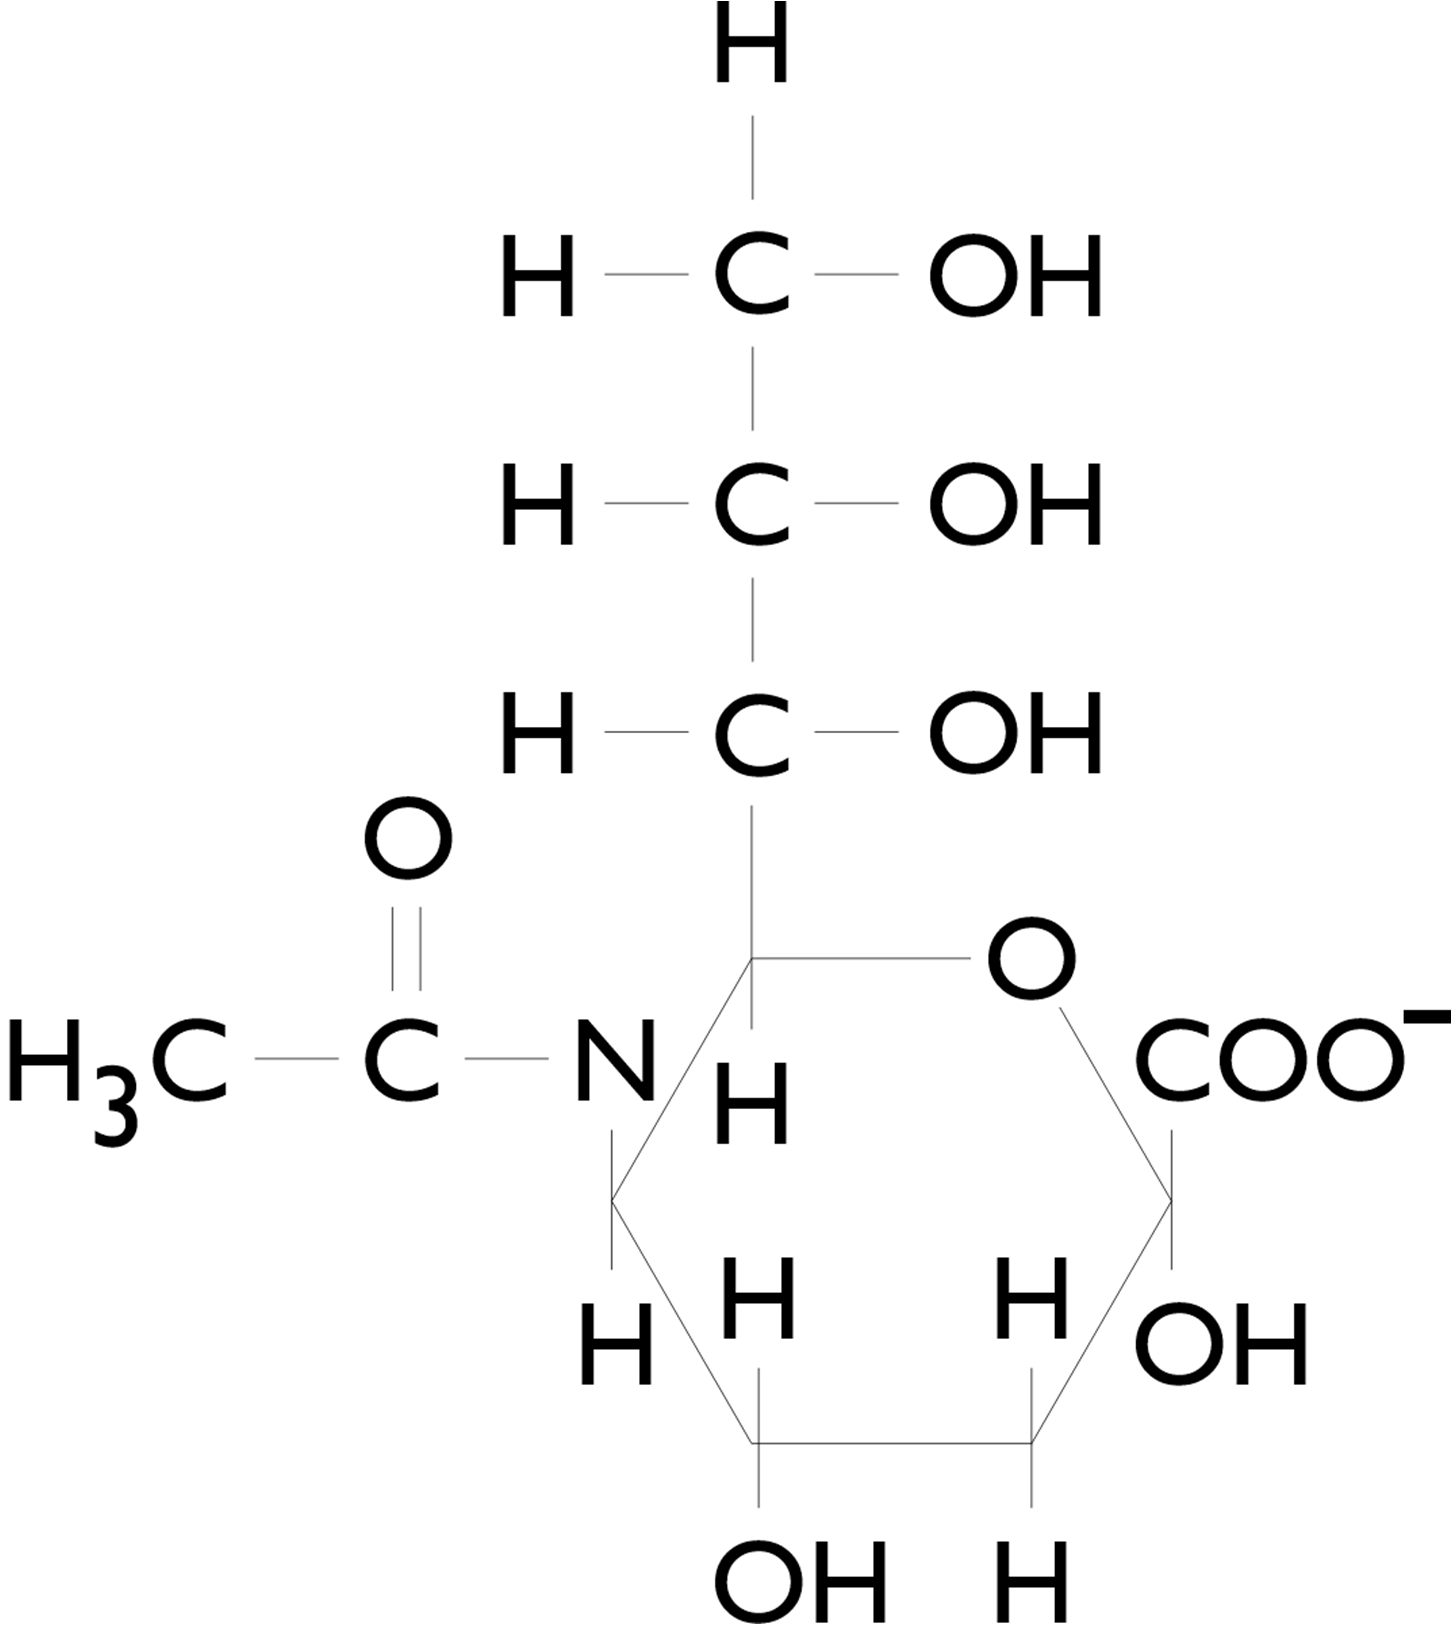 Chemical structure of sialic acid.